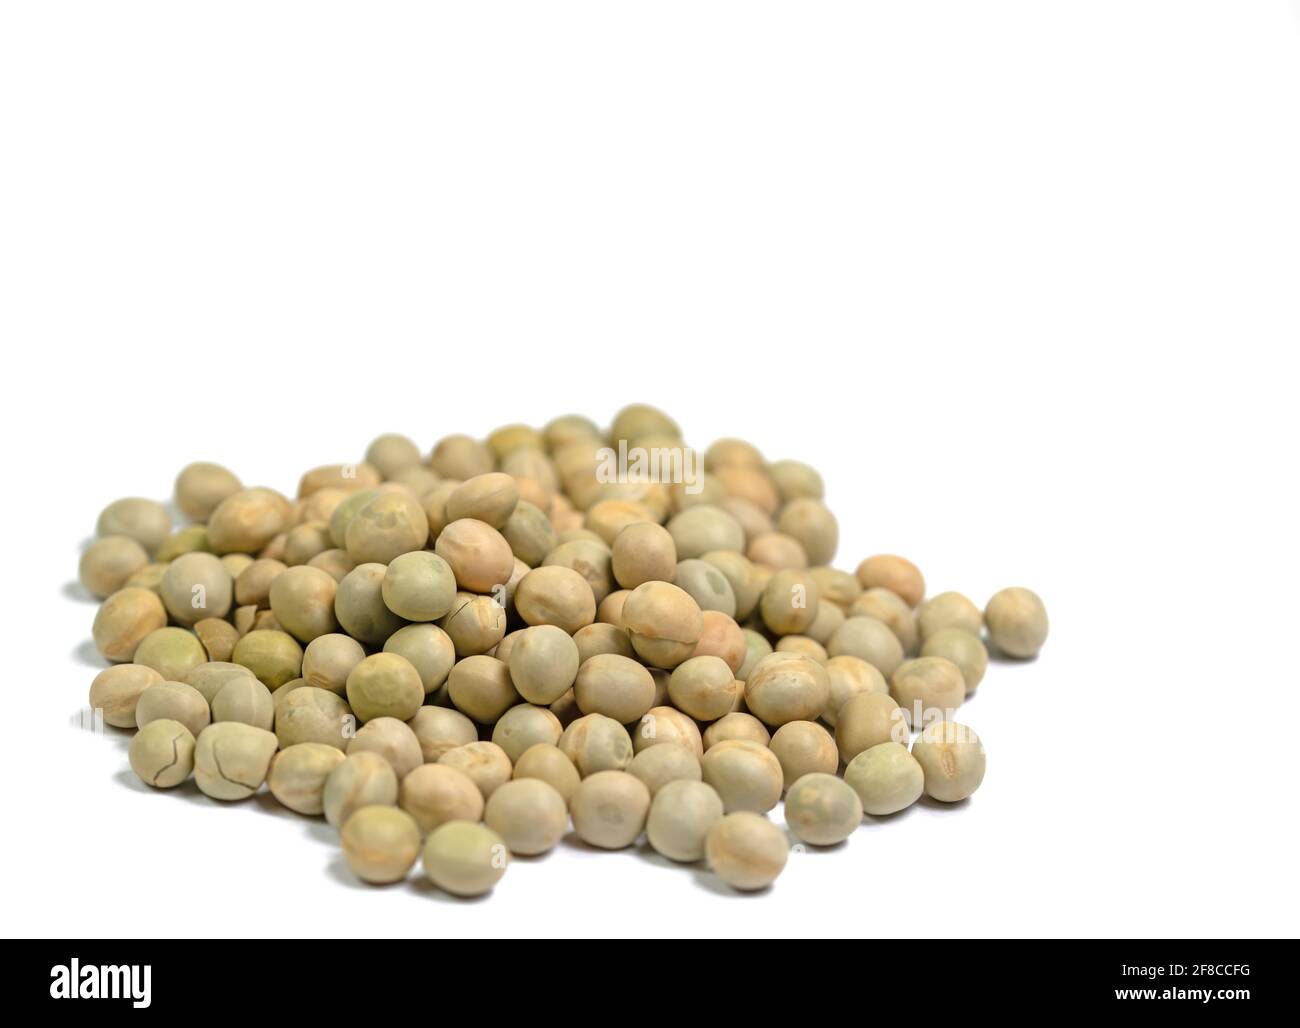 Dried peas against white background Stock Photo